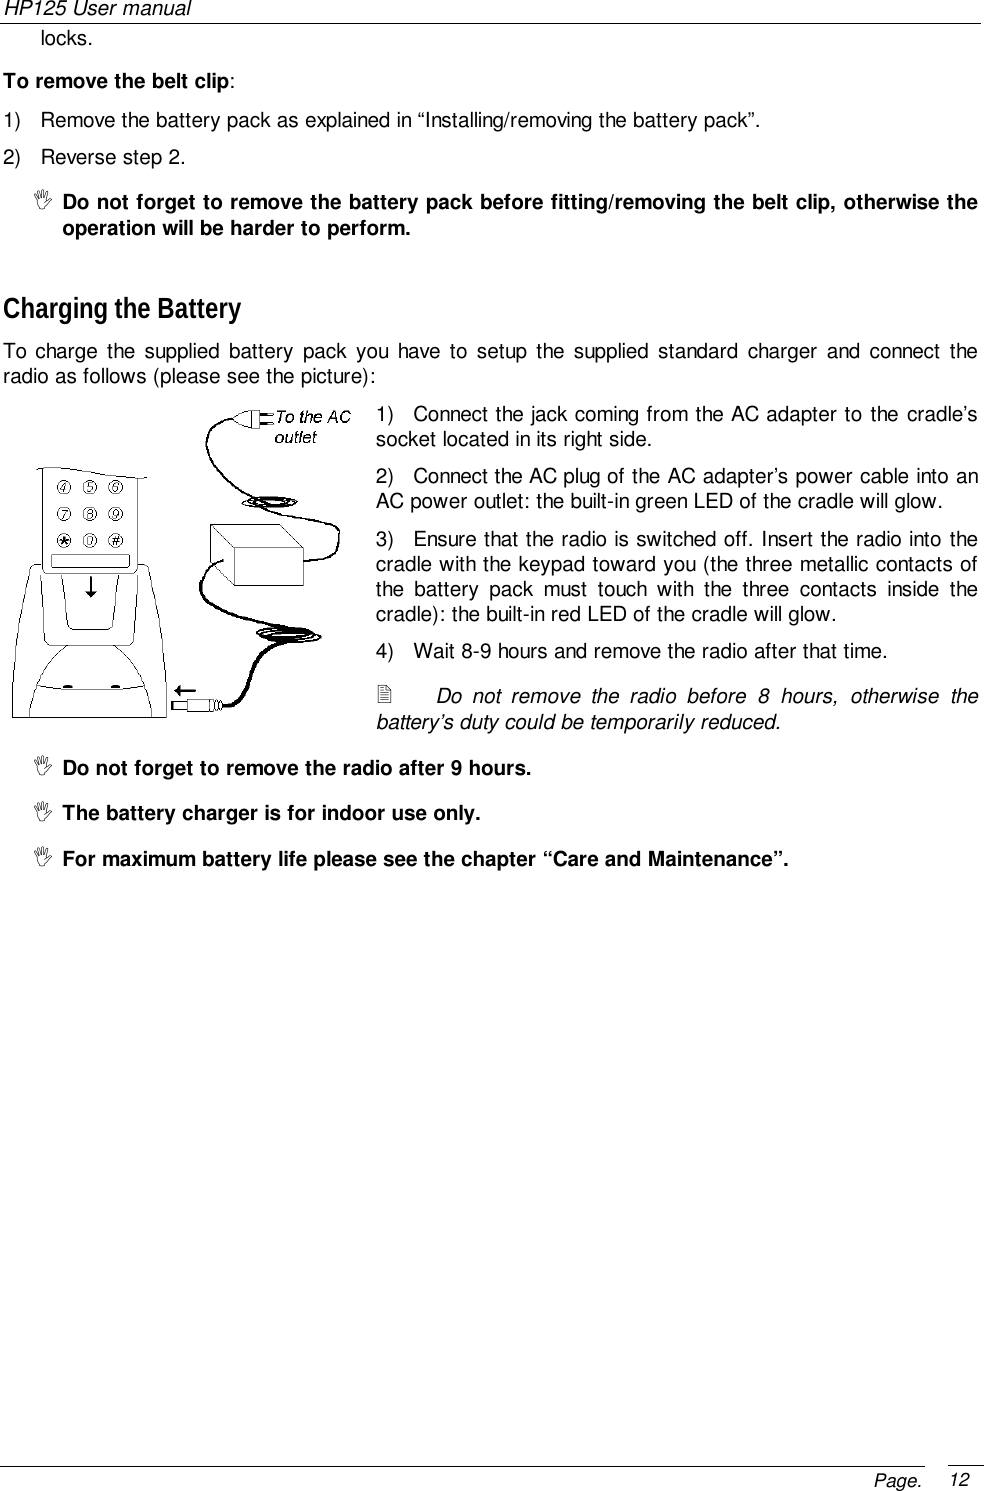 HP125 User manualPage. 12locks.To remove the belt clip:1)  Remove the battery pack as explained in “Installing/removing the battery pack”.2)  Reverse step 2.&quot; Do not forget to remove the battery pack before fitting/removing the belt clip, otherwise theoperation will be harder to perform.Charging the BatteryTo charge the supplied battery pack you have to setup the supplied standard charger and connect theradio as follows (please see the picture):1)  Connect the jack coming from the AC adapter to the cradle’ssocket located in its right side.2)  Connect the AC plug of the AC adapter’s power cable into anAC power outlet: the built-in green LED of the cradle will glow.3)  Ensure that the radio is switched off. Insert the radio into thecradle with the keypad toward you (the three metallic contacts ofthe battery pack must touch with the three contacts inside thecradle): the built-in red LED of the cradle will glow.4)  Wait 8-9 hours and remove the radio after that time.! Do not remove the radio before 8 hours, otherwise thebattery’s duty could be temporarily reduced.&quot; Do not forget to remove the radio after 9 hours.&quot; The battery charger is for indoor use only.&quot; For maximum battery life please see the chapter “Care and Maintenance”.